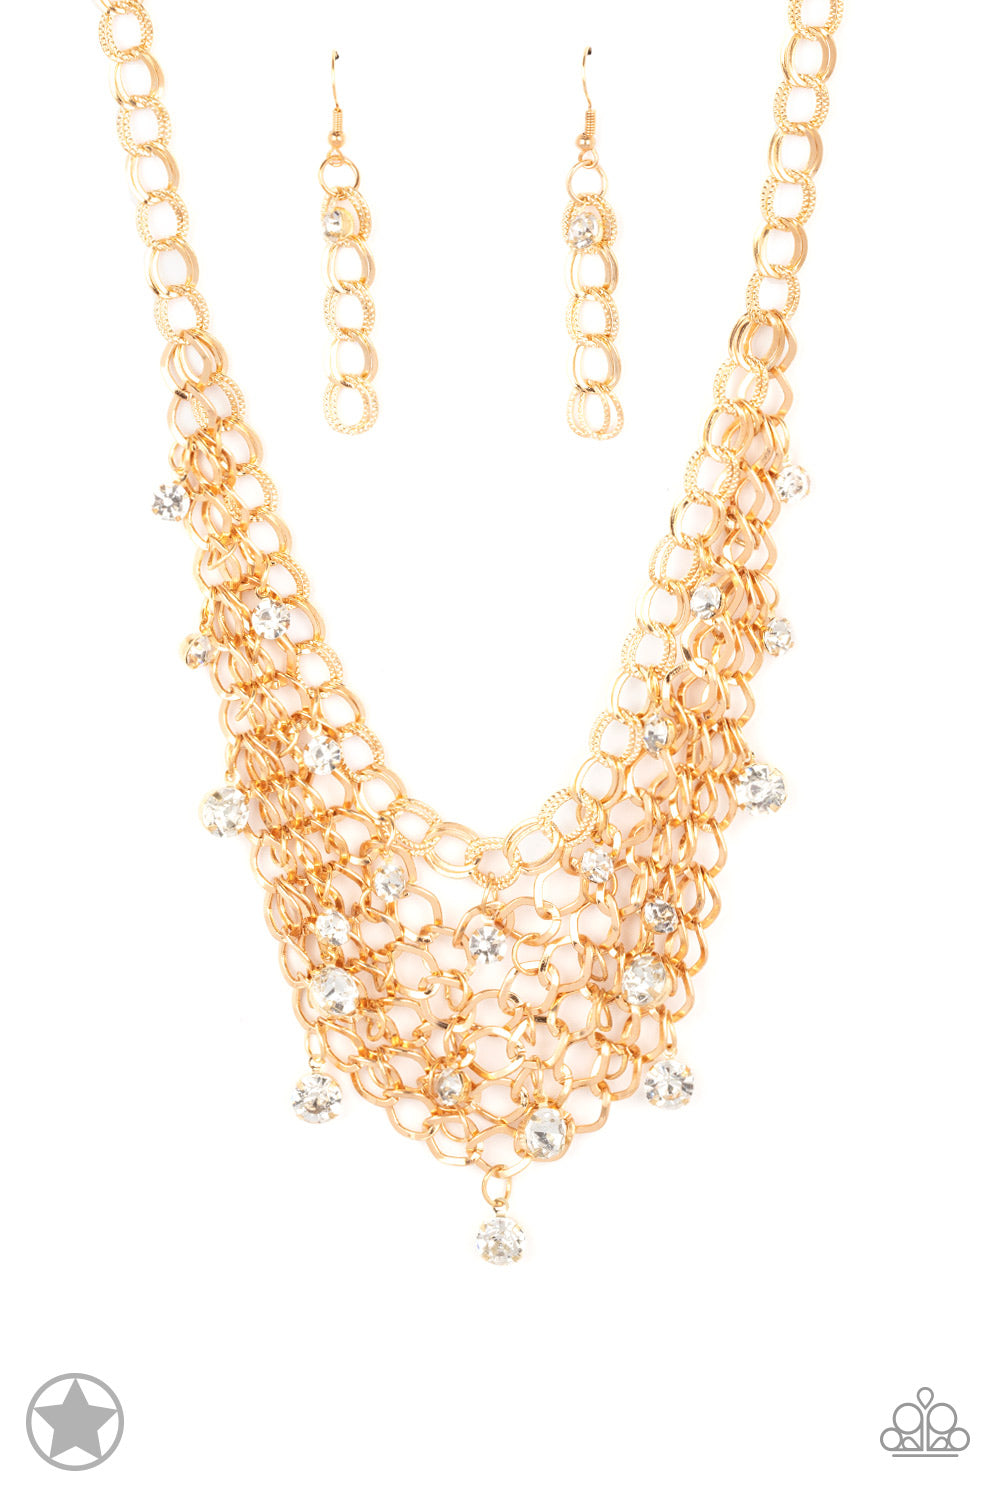 Fishing for Compliments - Gold Chain and Rhinestone Necklace